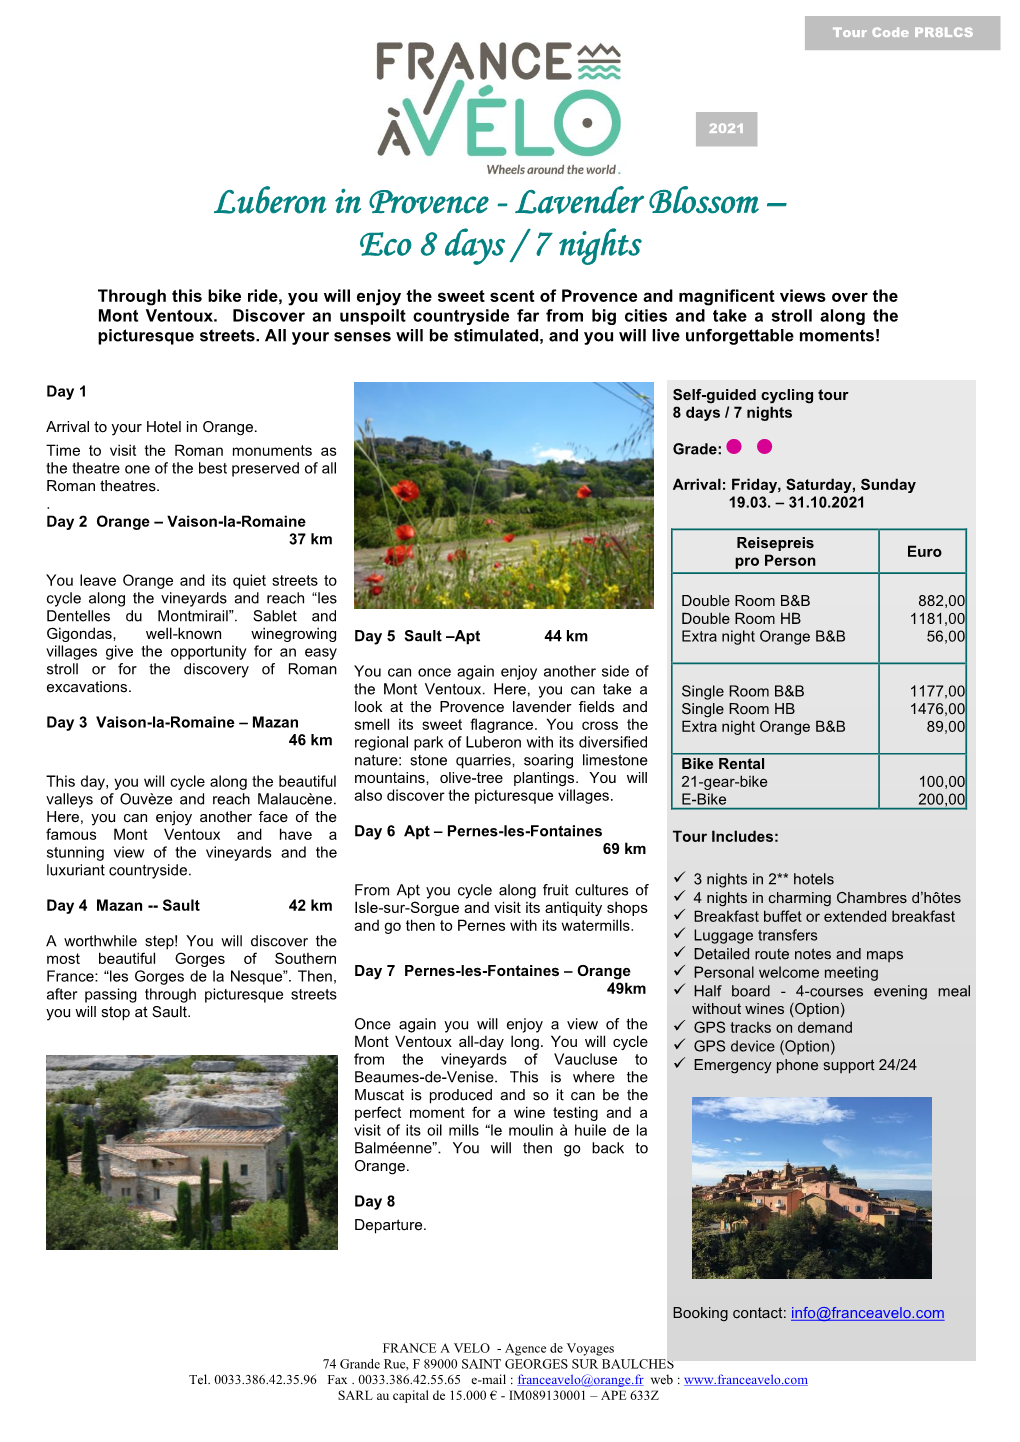 Luberon in Provence - Lavender Blossom – Eco 8 Days / 7 Nights